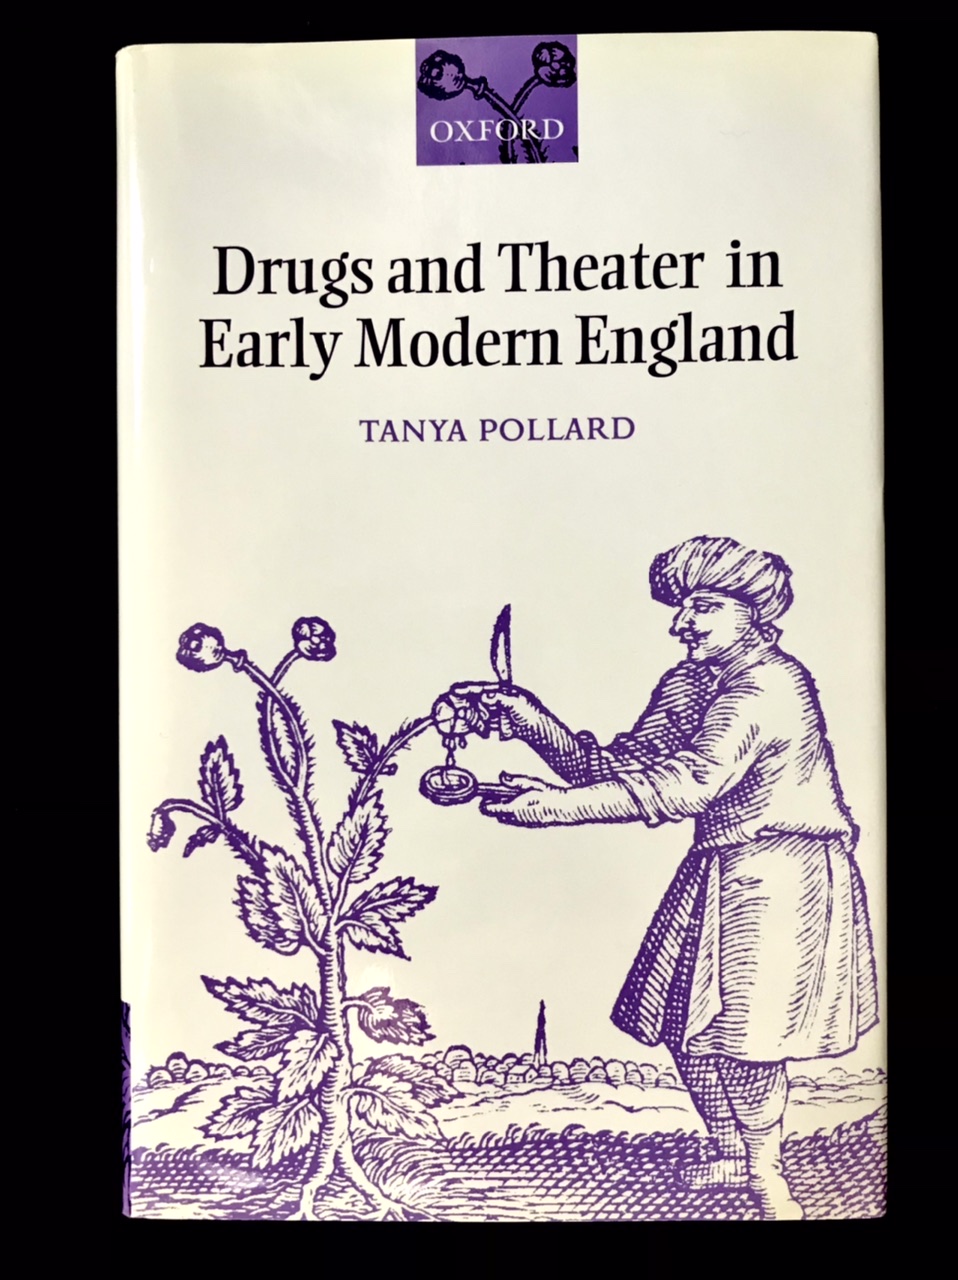 Drugs & Theater In Early Modern England by Tanya Pollard